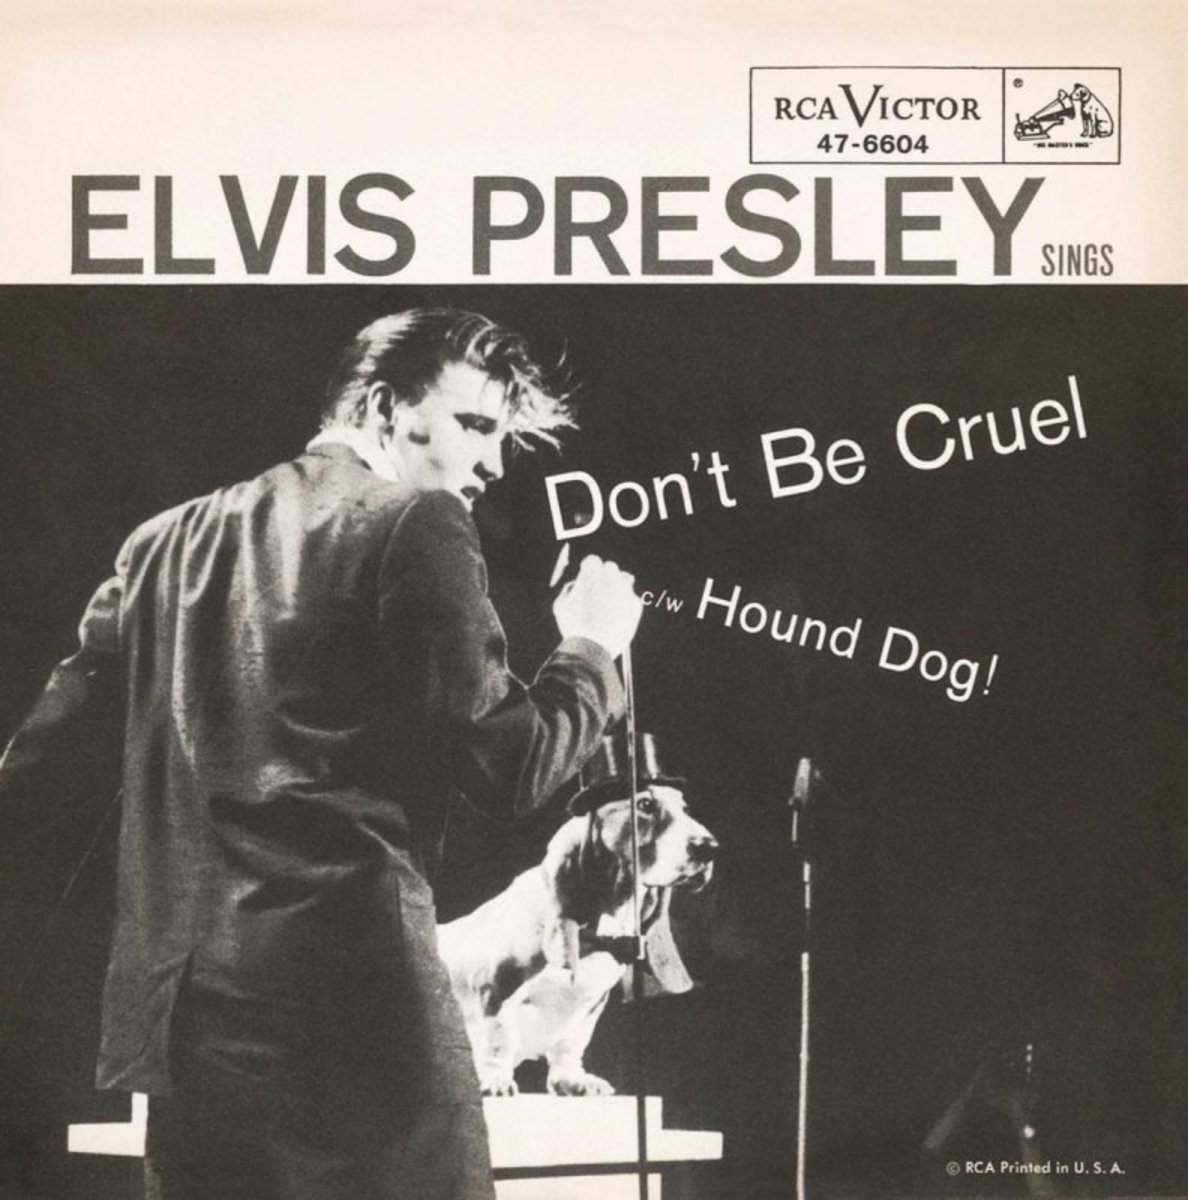 An original copy of "Don't Be Cruel" with picture sleeve is worth about 10 dollars in NM condition. Image courtesy of 45cat.com.